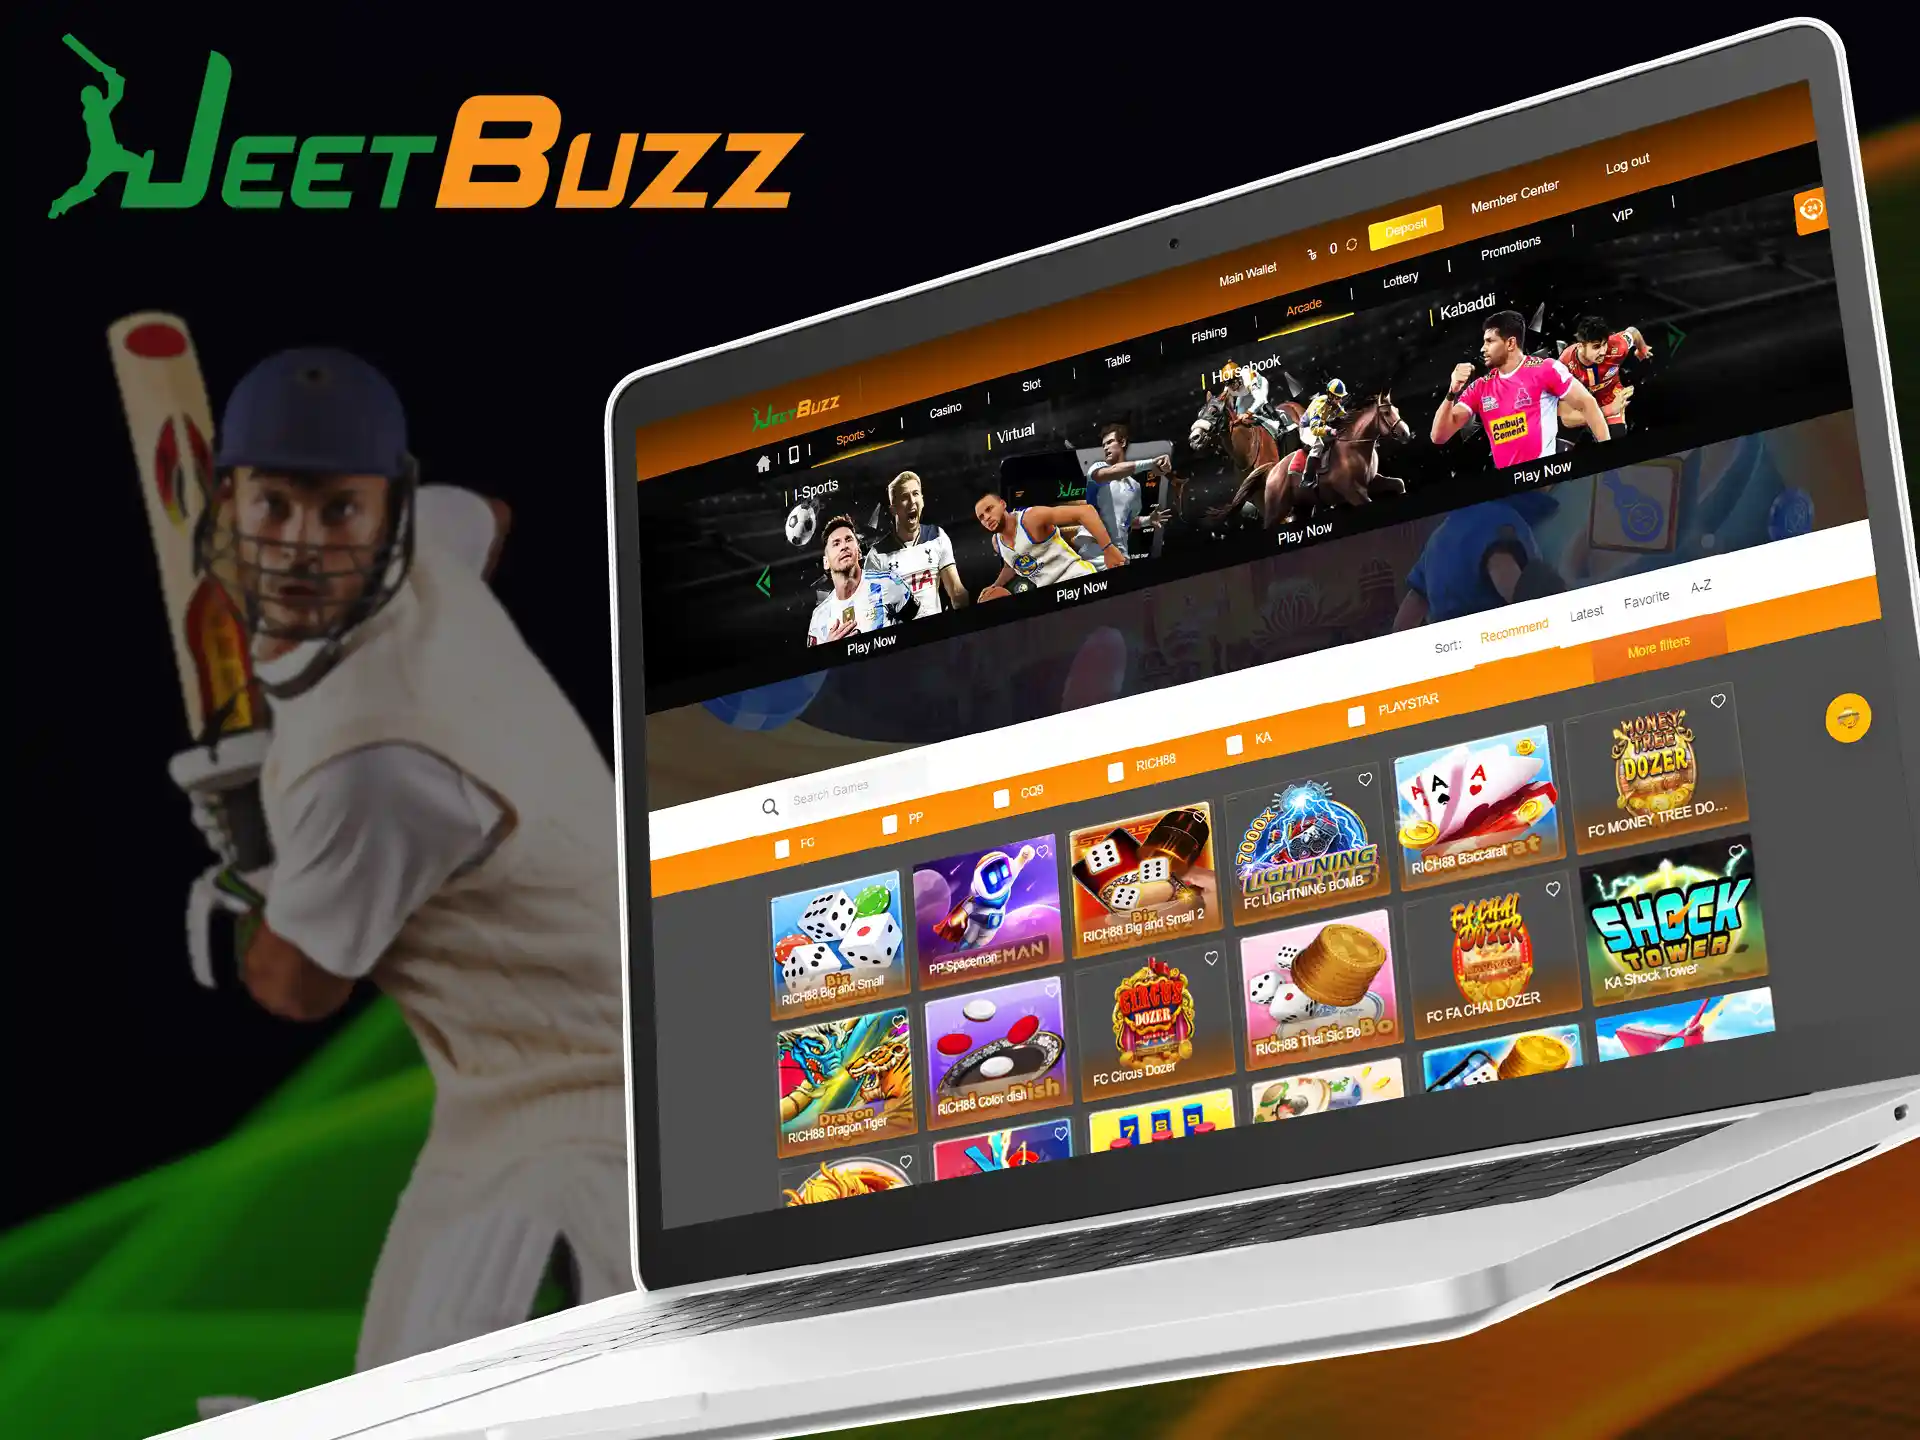 A variety of available games from global providers on JeetBuzz.